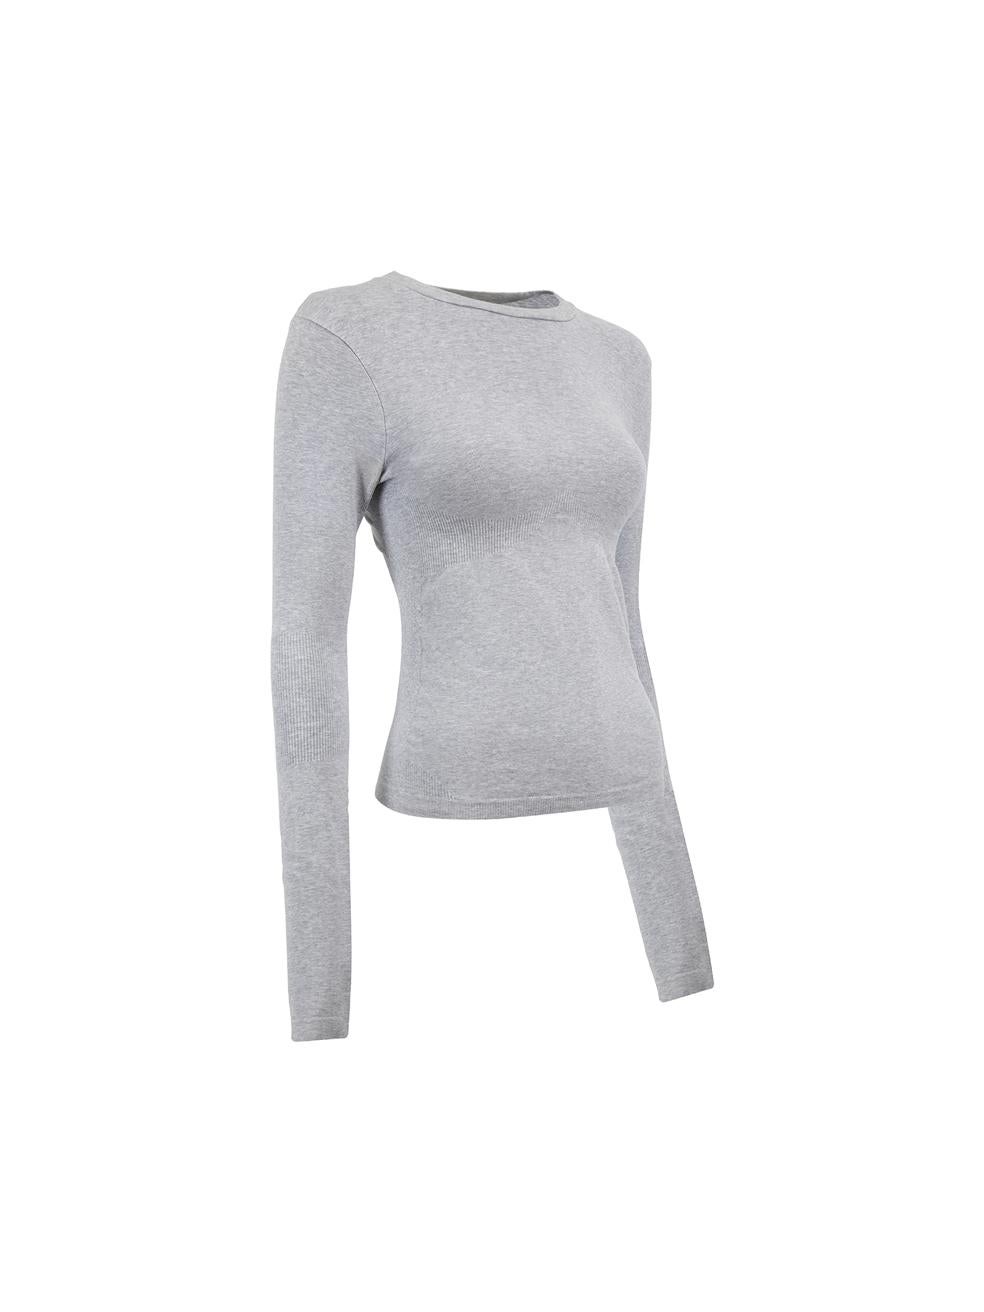 CONDITION is Good. Minimal wear to top is evident. Minimal wear to the left underarm where the seam has been repaired on this used Prada Sport designer resale item. 



Details


Grey

Cotton

Long sleeves top

Figure hugging fit

Ribbed knit accent